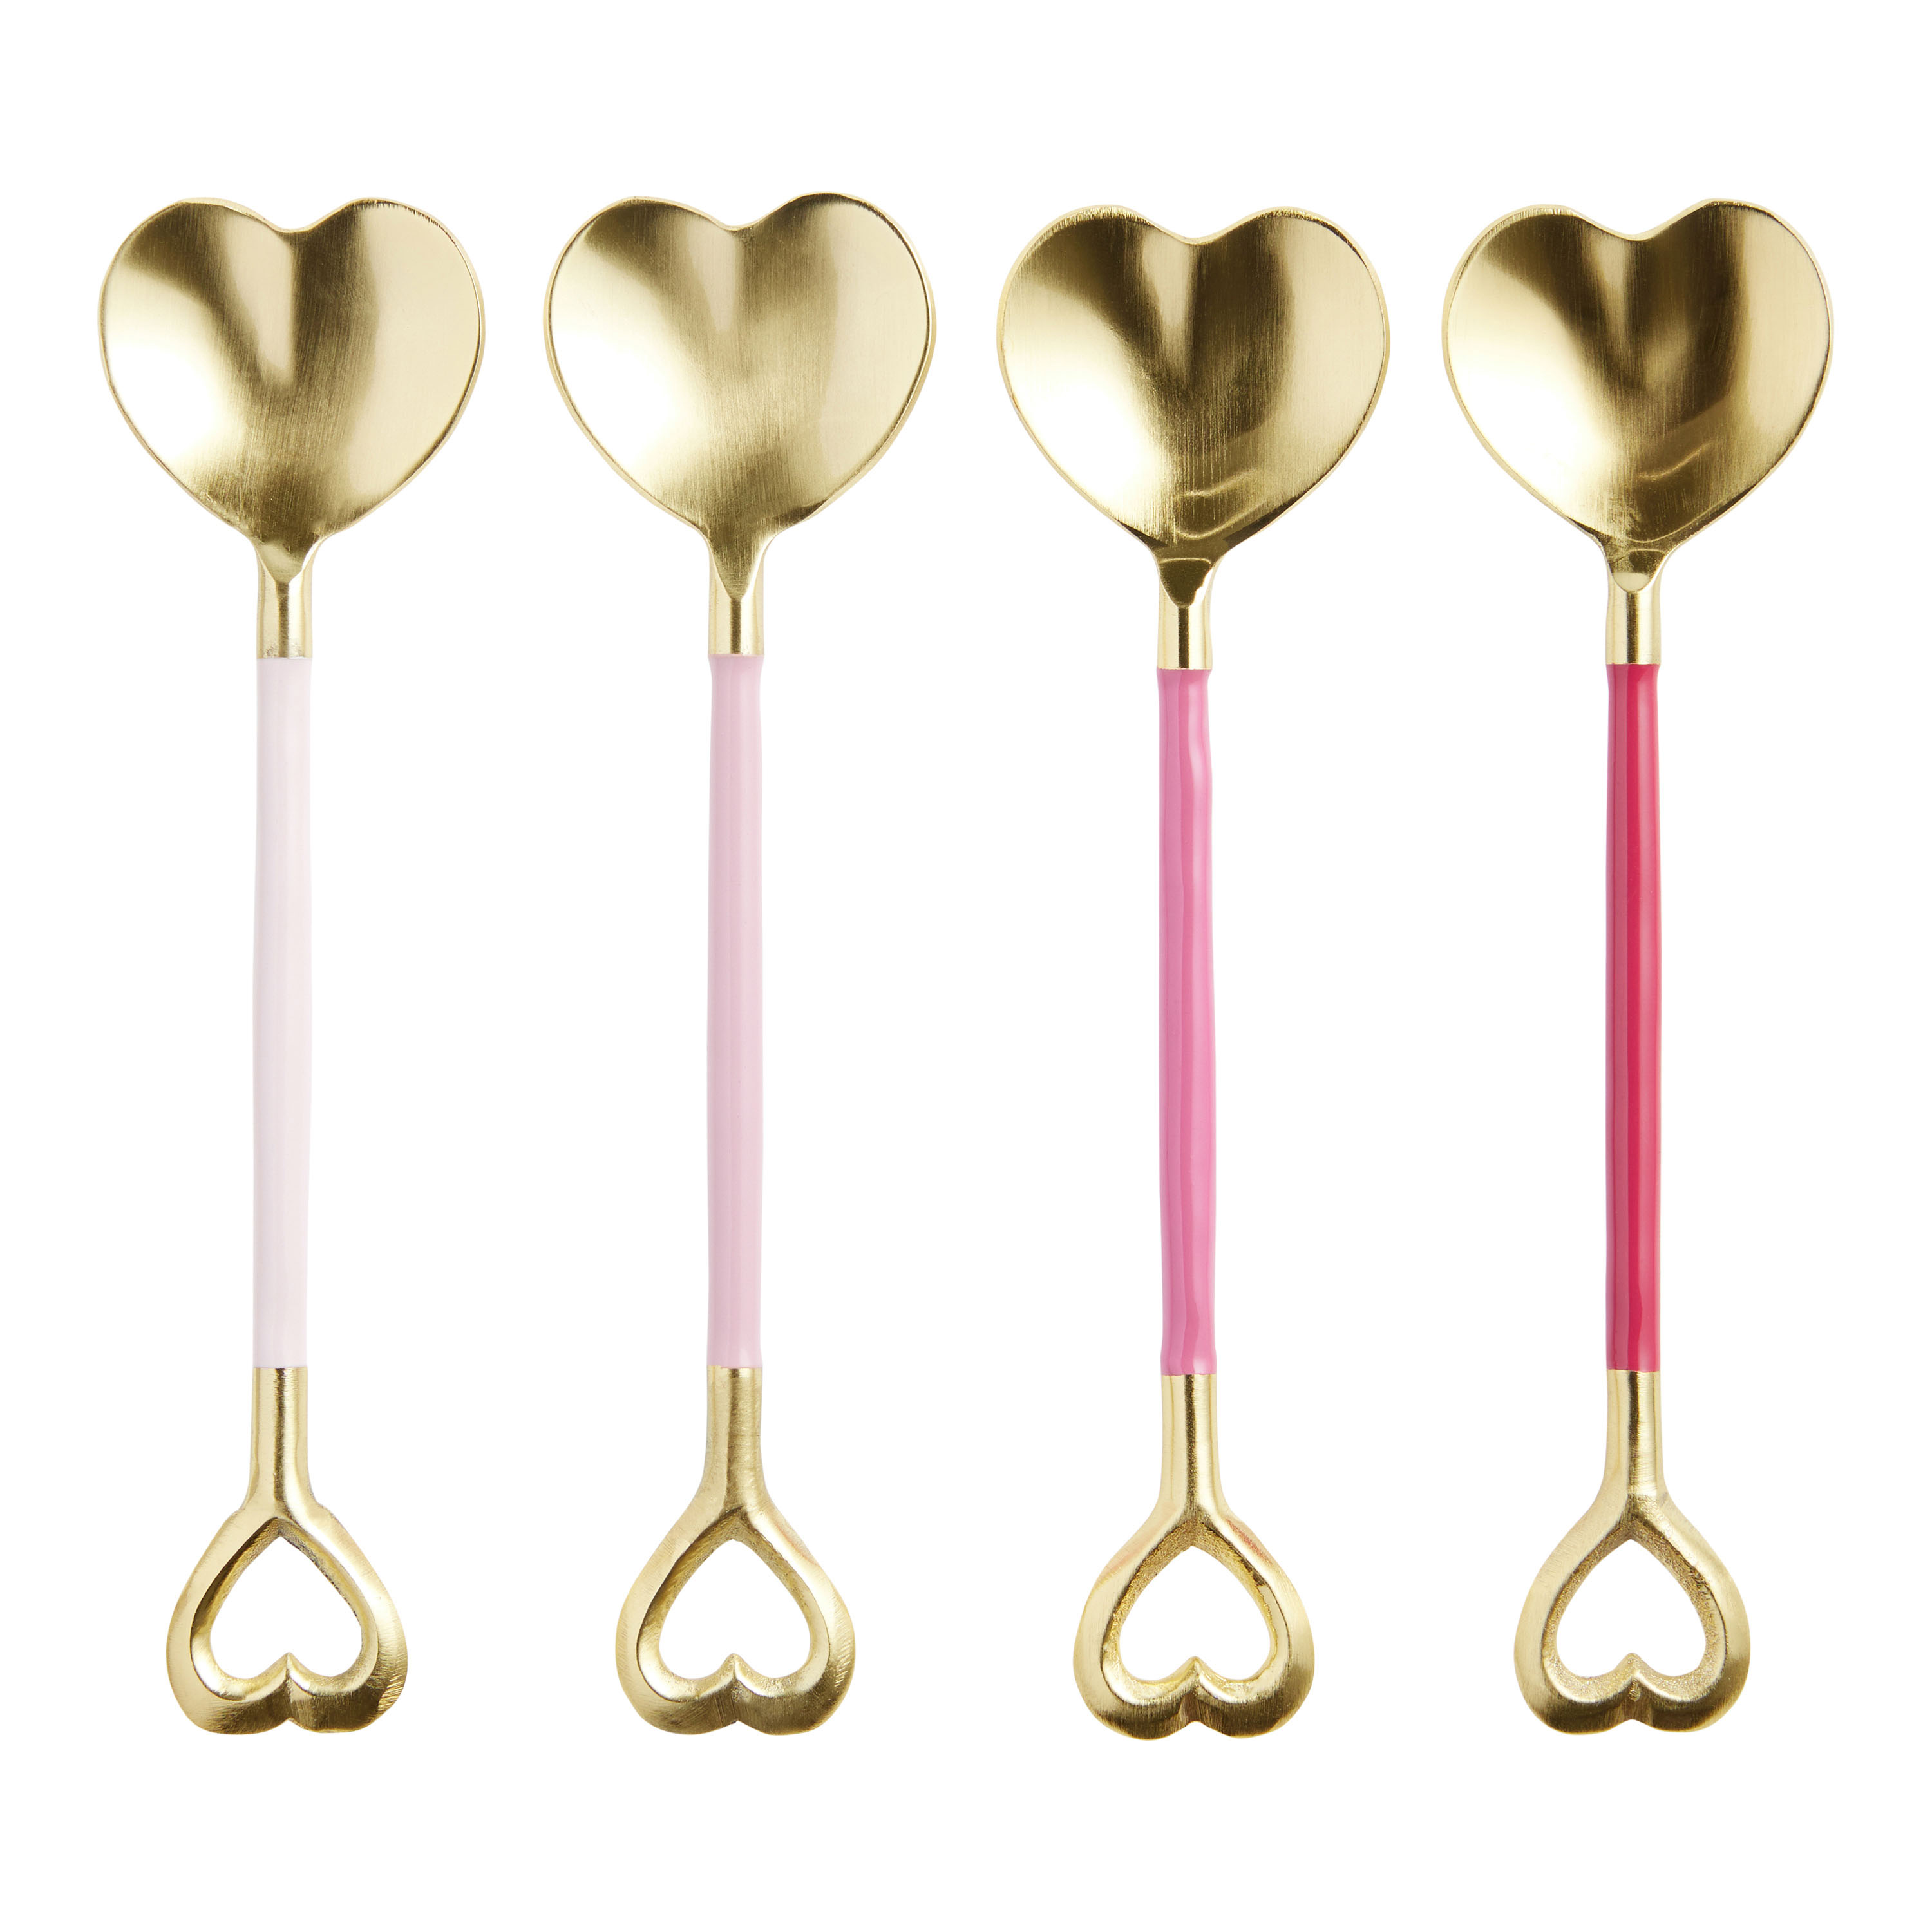 Gold And Pink Enameled Heart Coffee Spoons 4 Pack - World Market